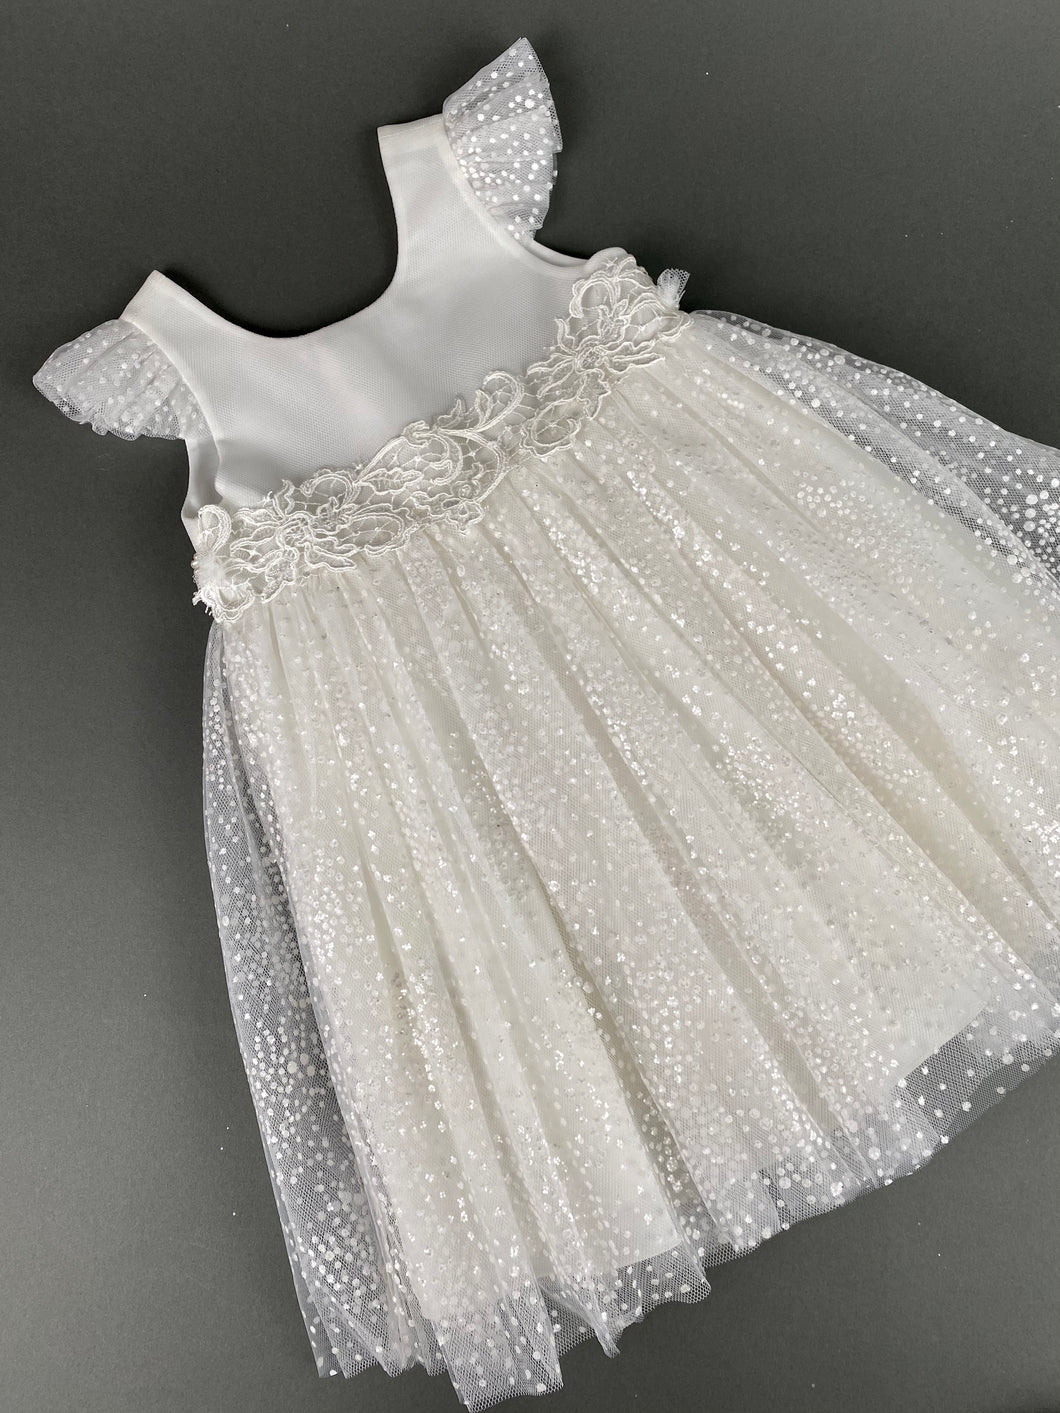 Dress 68 Girls Baptismal Christening Embroidered French Glitter Lace with Cap Sleeves, matching Bolero and Hat. Made in Greece exclusively for Rosies Collections